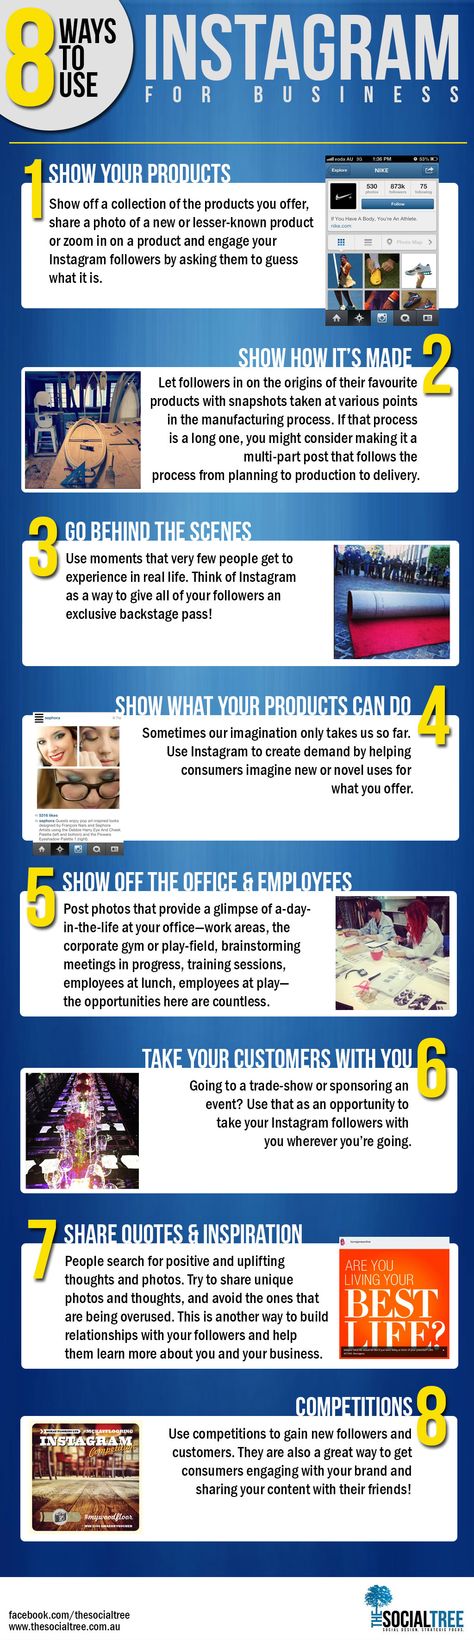 8 Ways To Use Instagram For Business - #Infographic #Social Media Marketing #Small Business